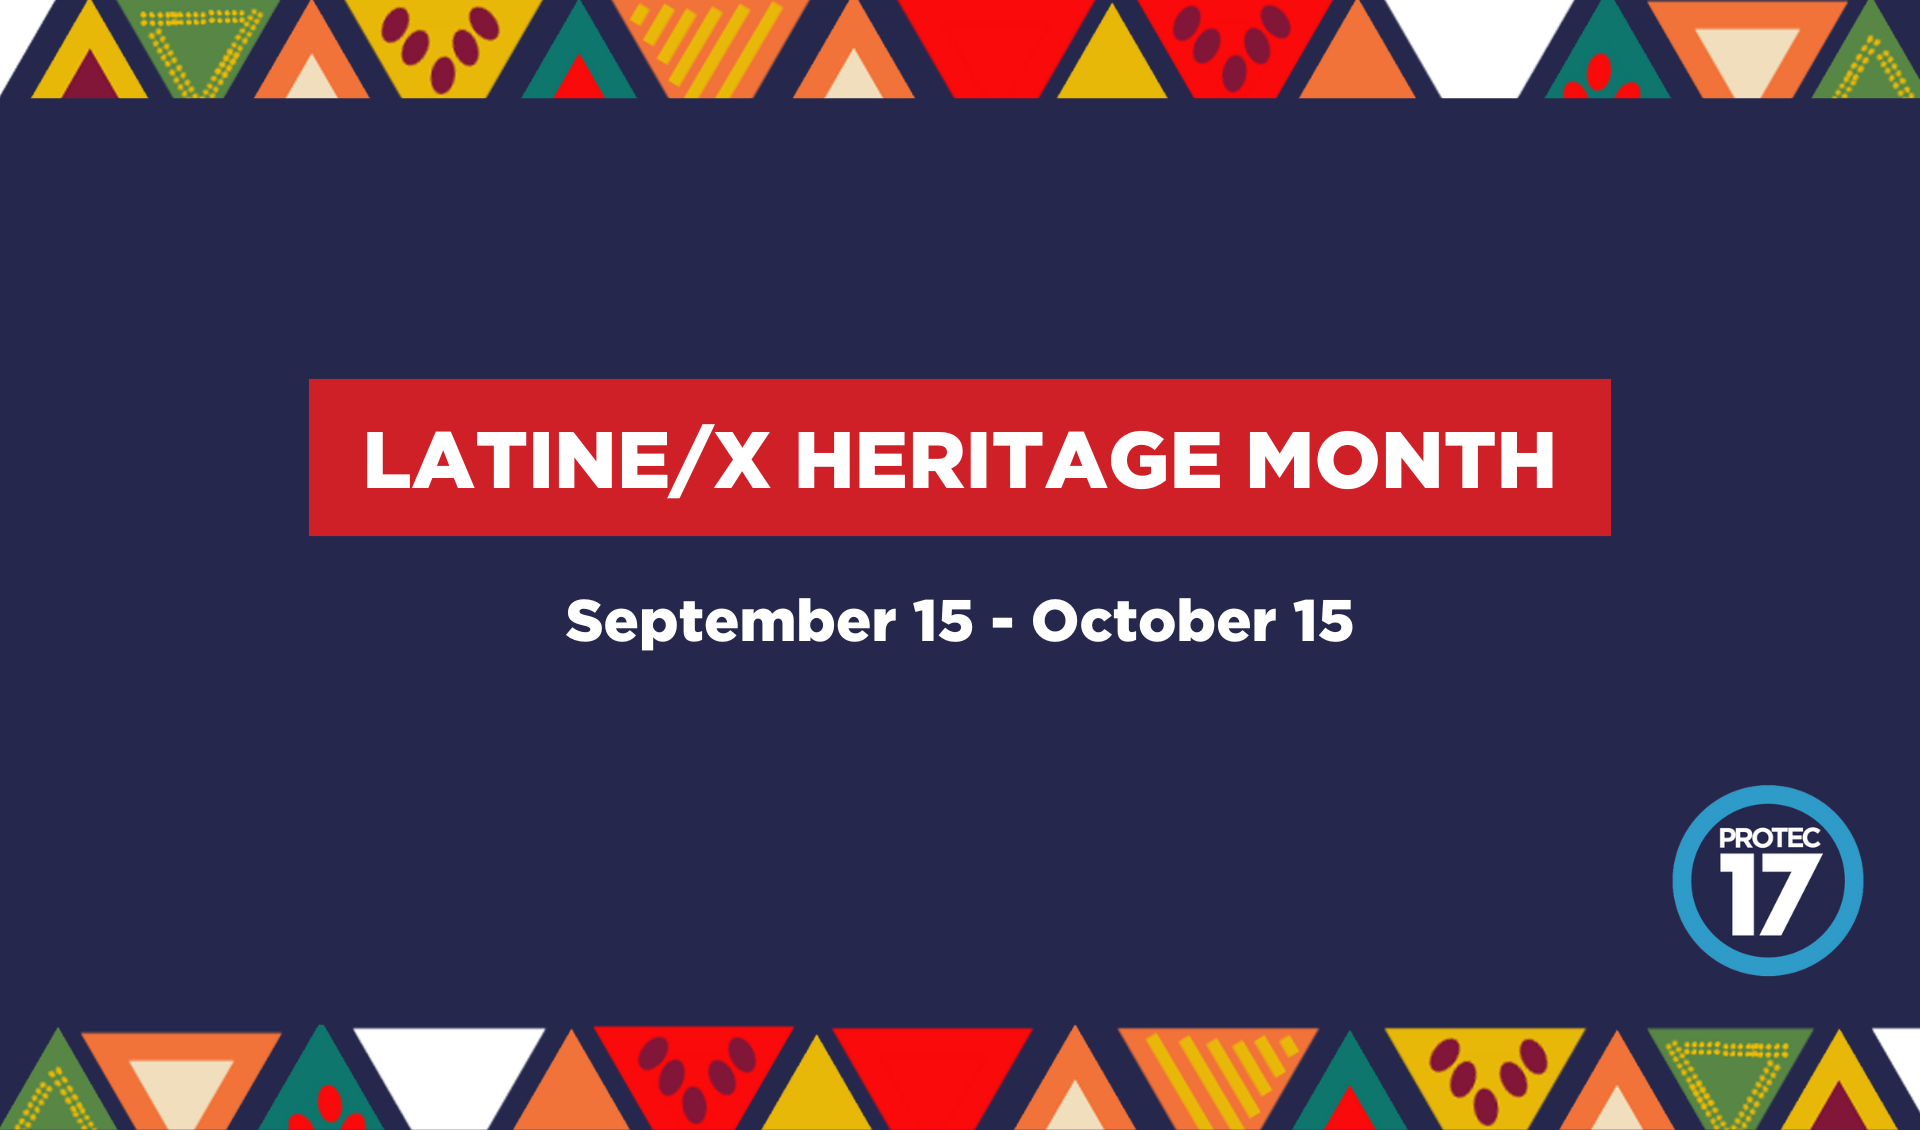 Colorful banner image with text that reads, "Latine/x Heritage Month | Sep. 15 - Oct. 15." The PROTEC17 logo is in the bottom right.